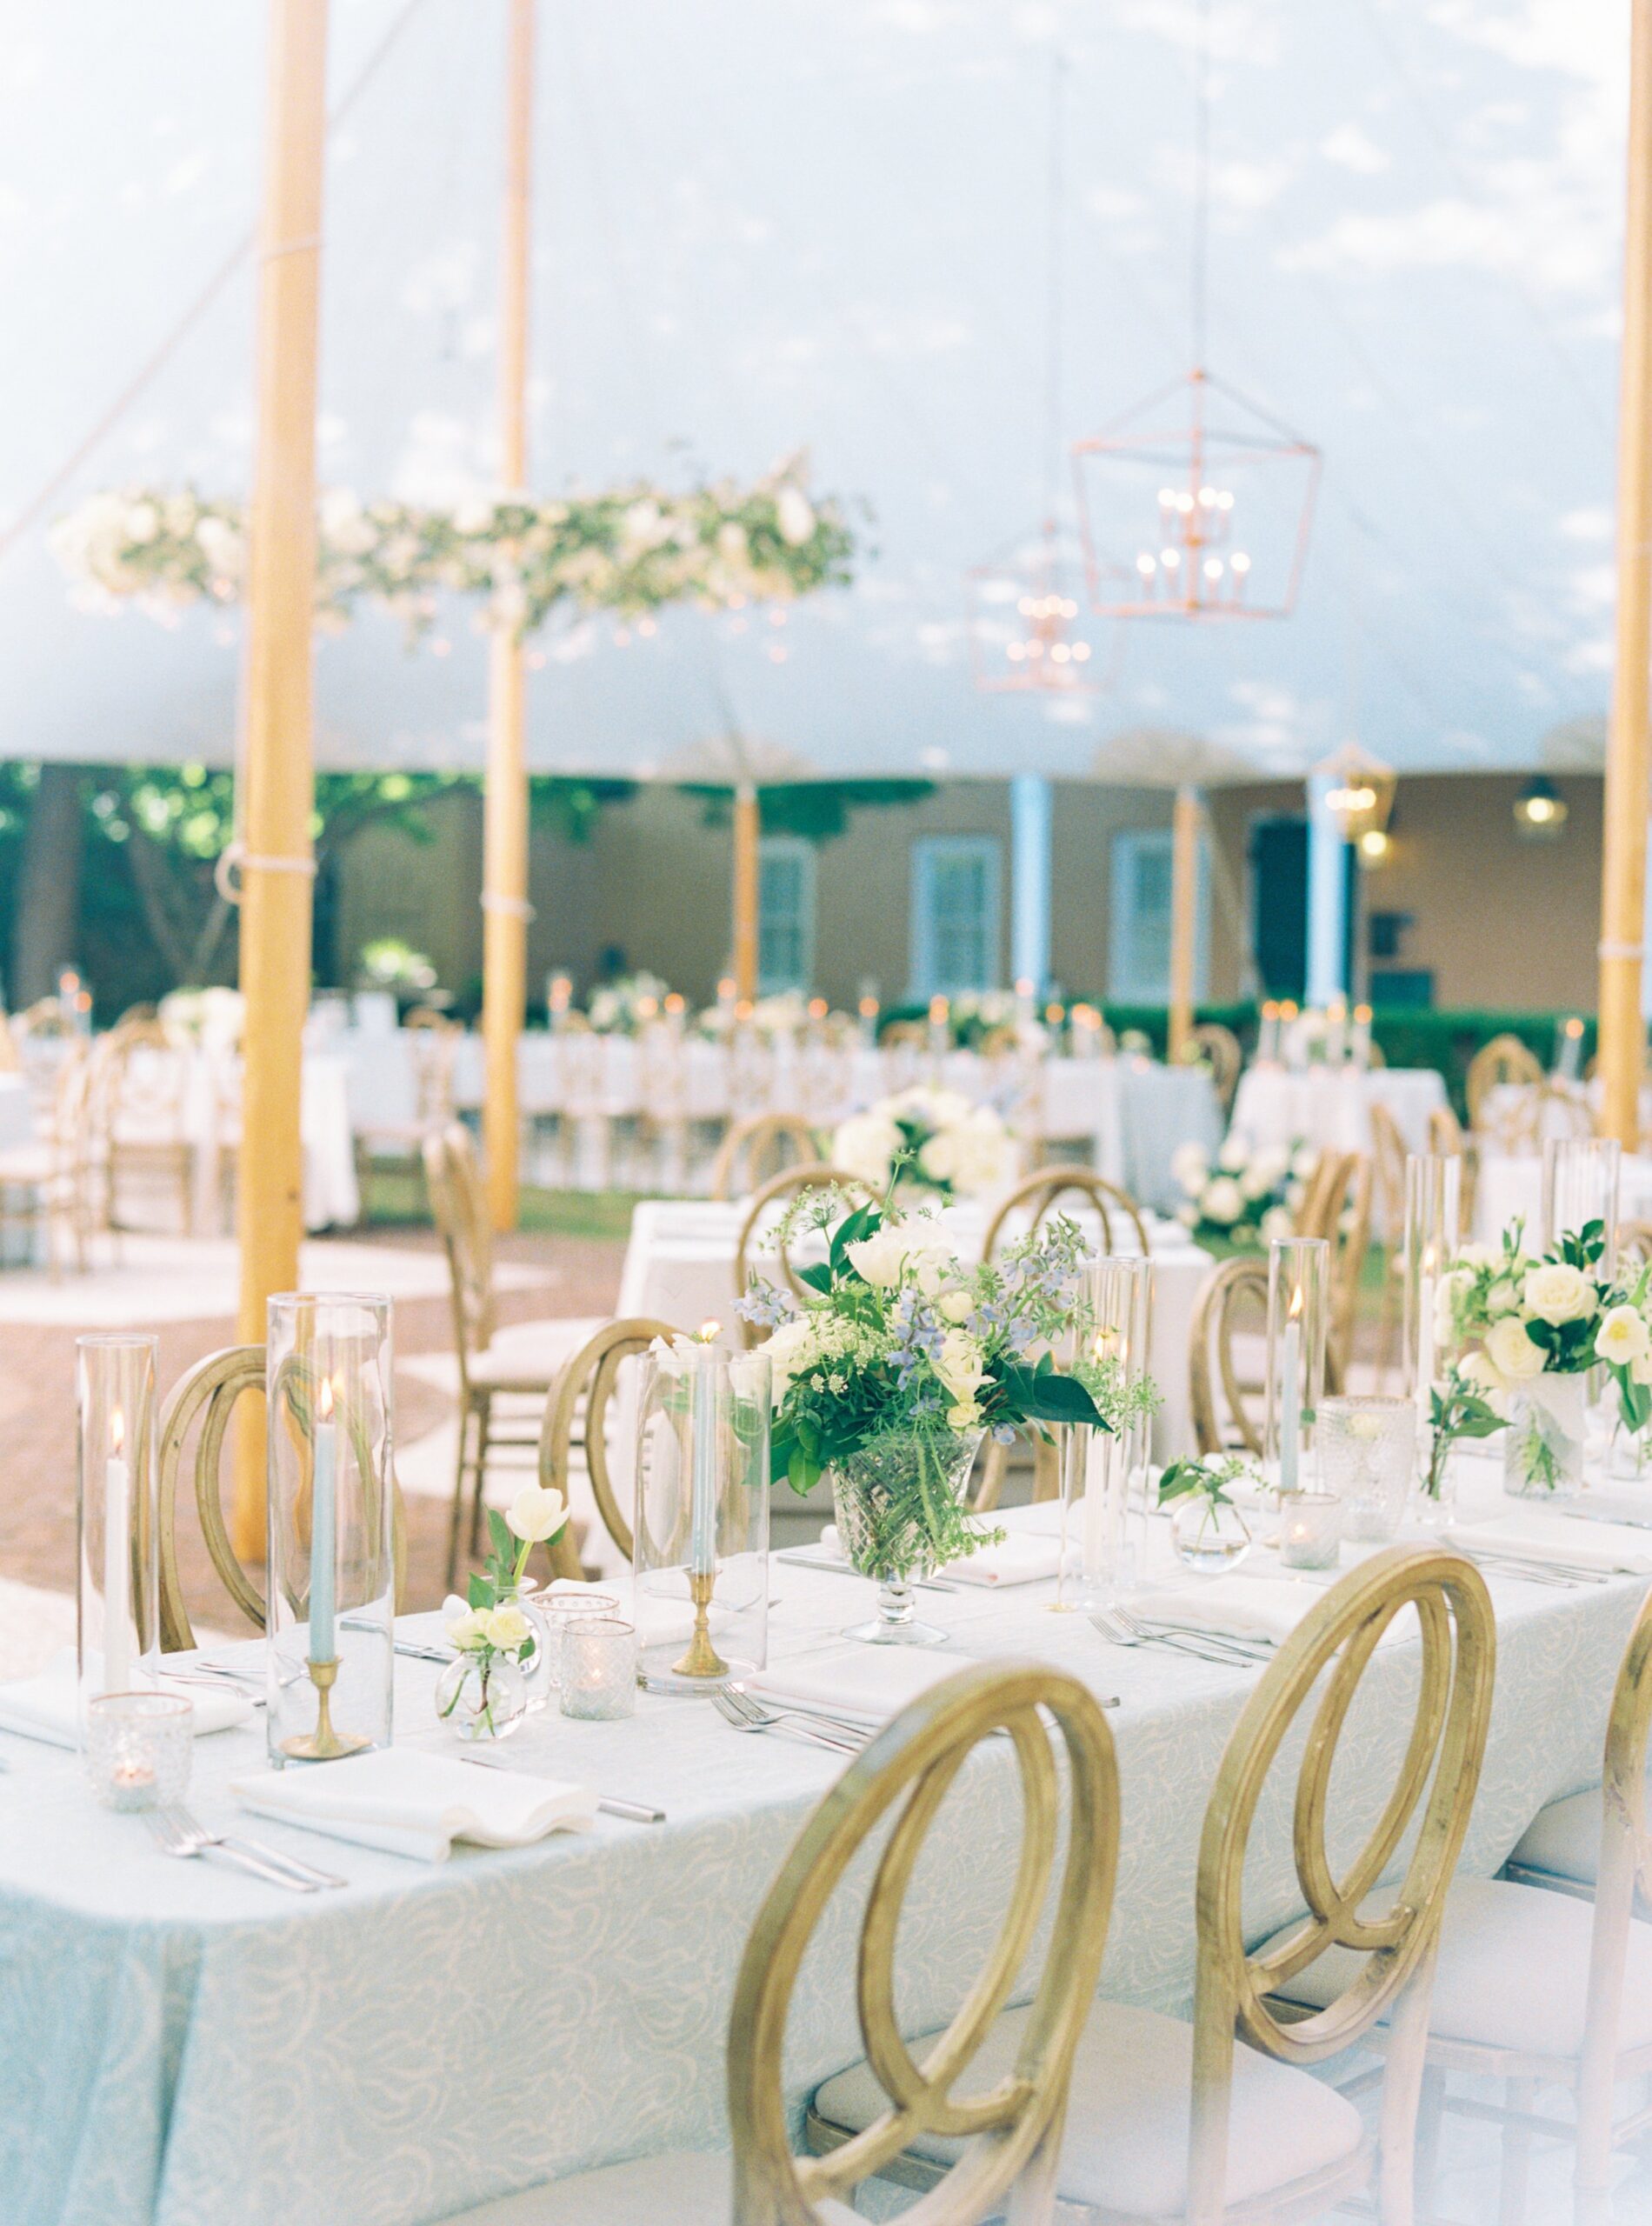 Charleston spring wedding sperry tent with chandeliers and circular hanging floral installation.